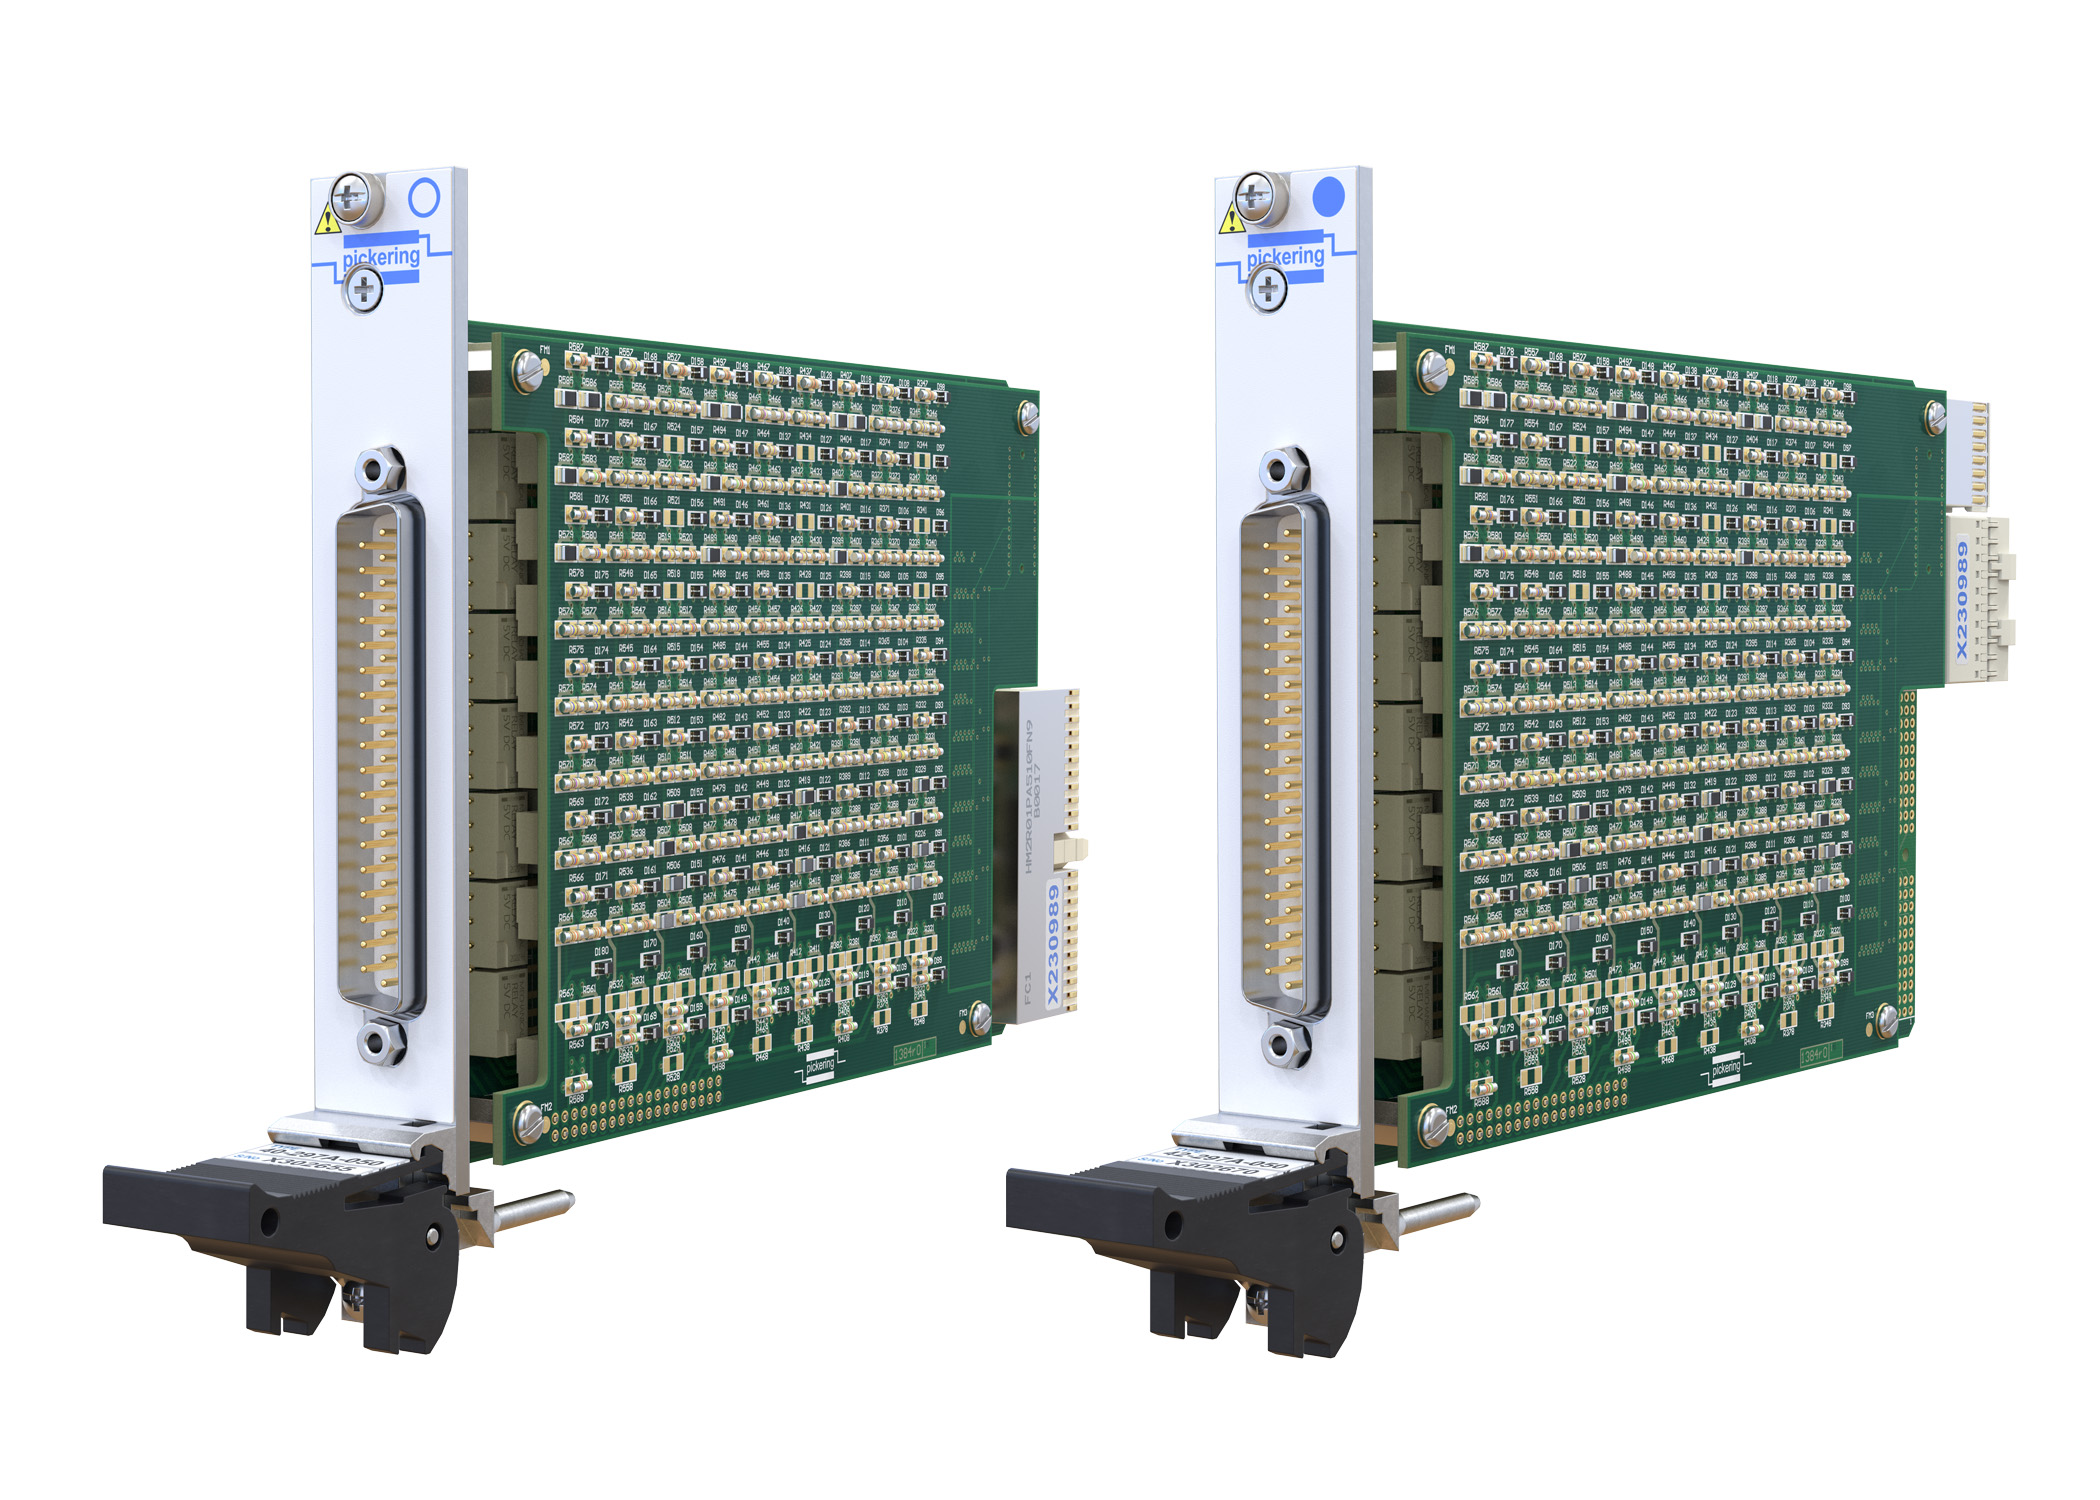 PXI and PXIe modules are available from Pickering to extend resistance range for sensor simulation